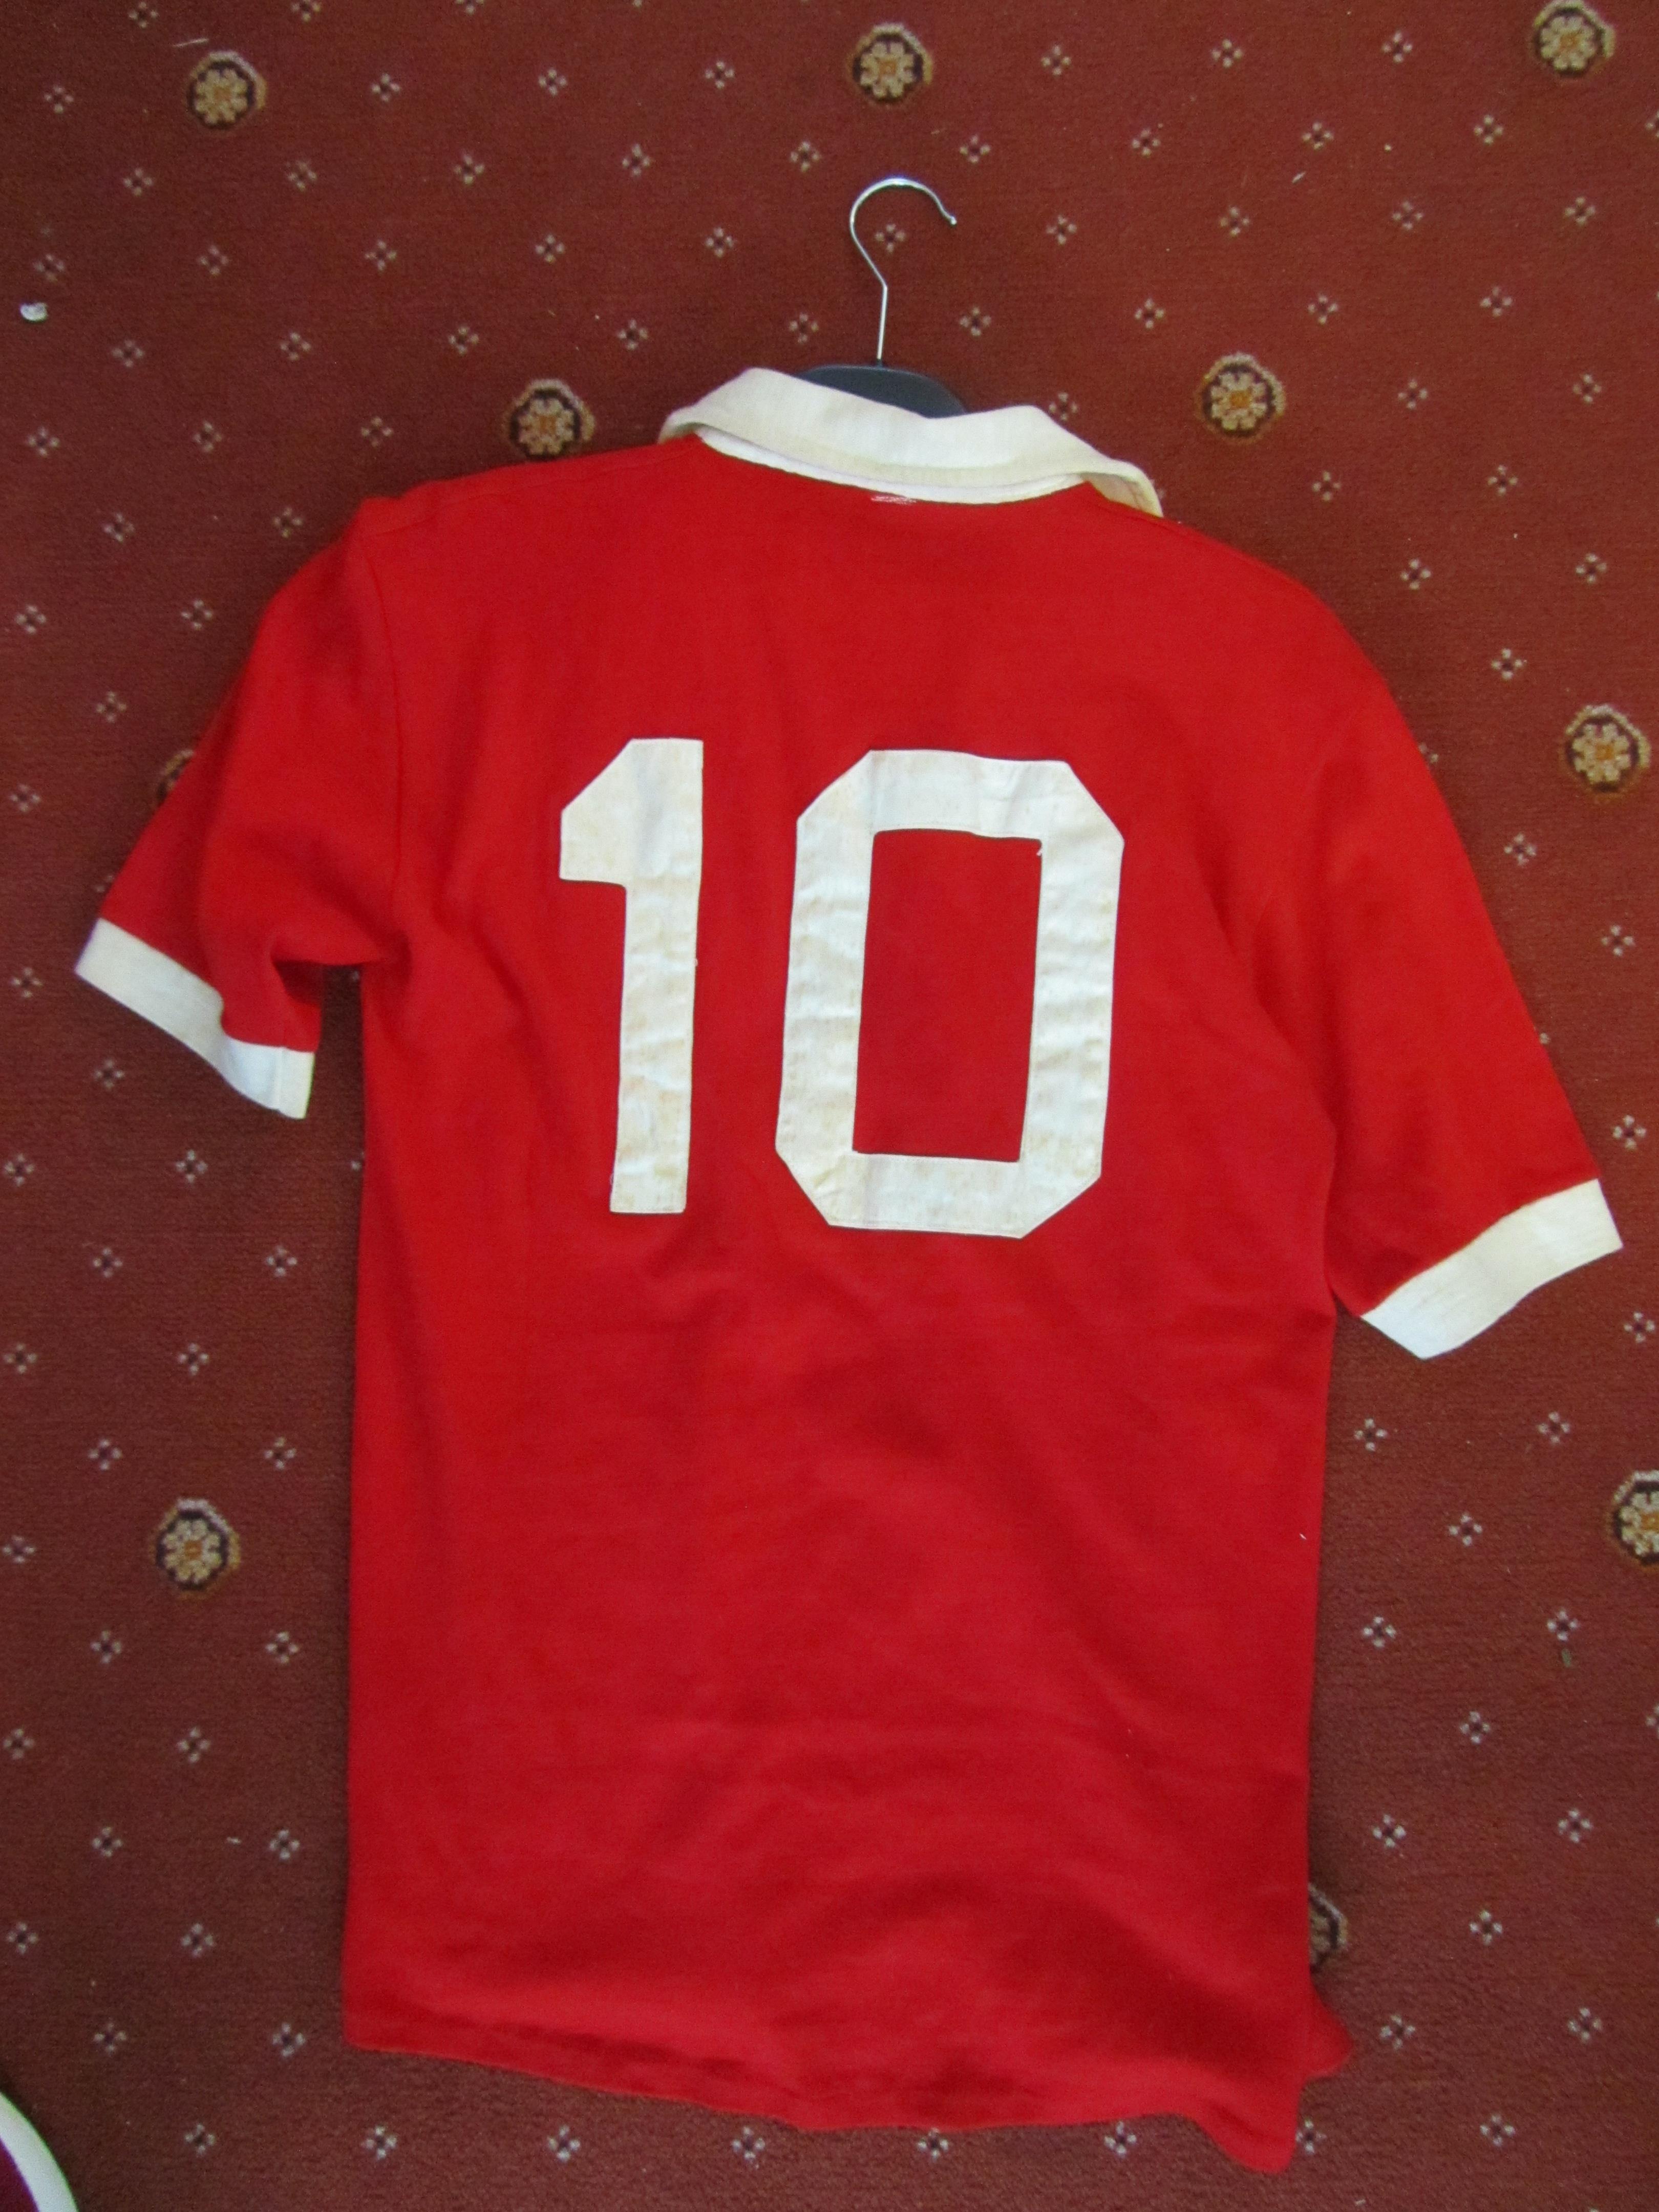 Eusebio signed red Benfica No. - Image 6 of 6